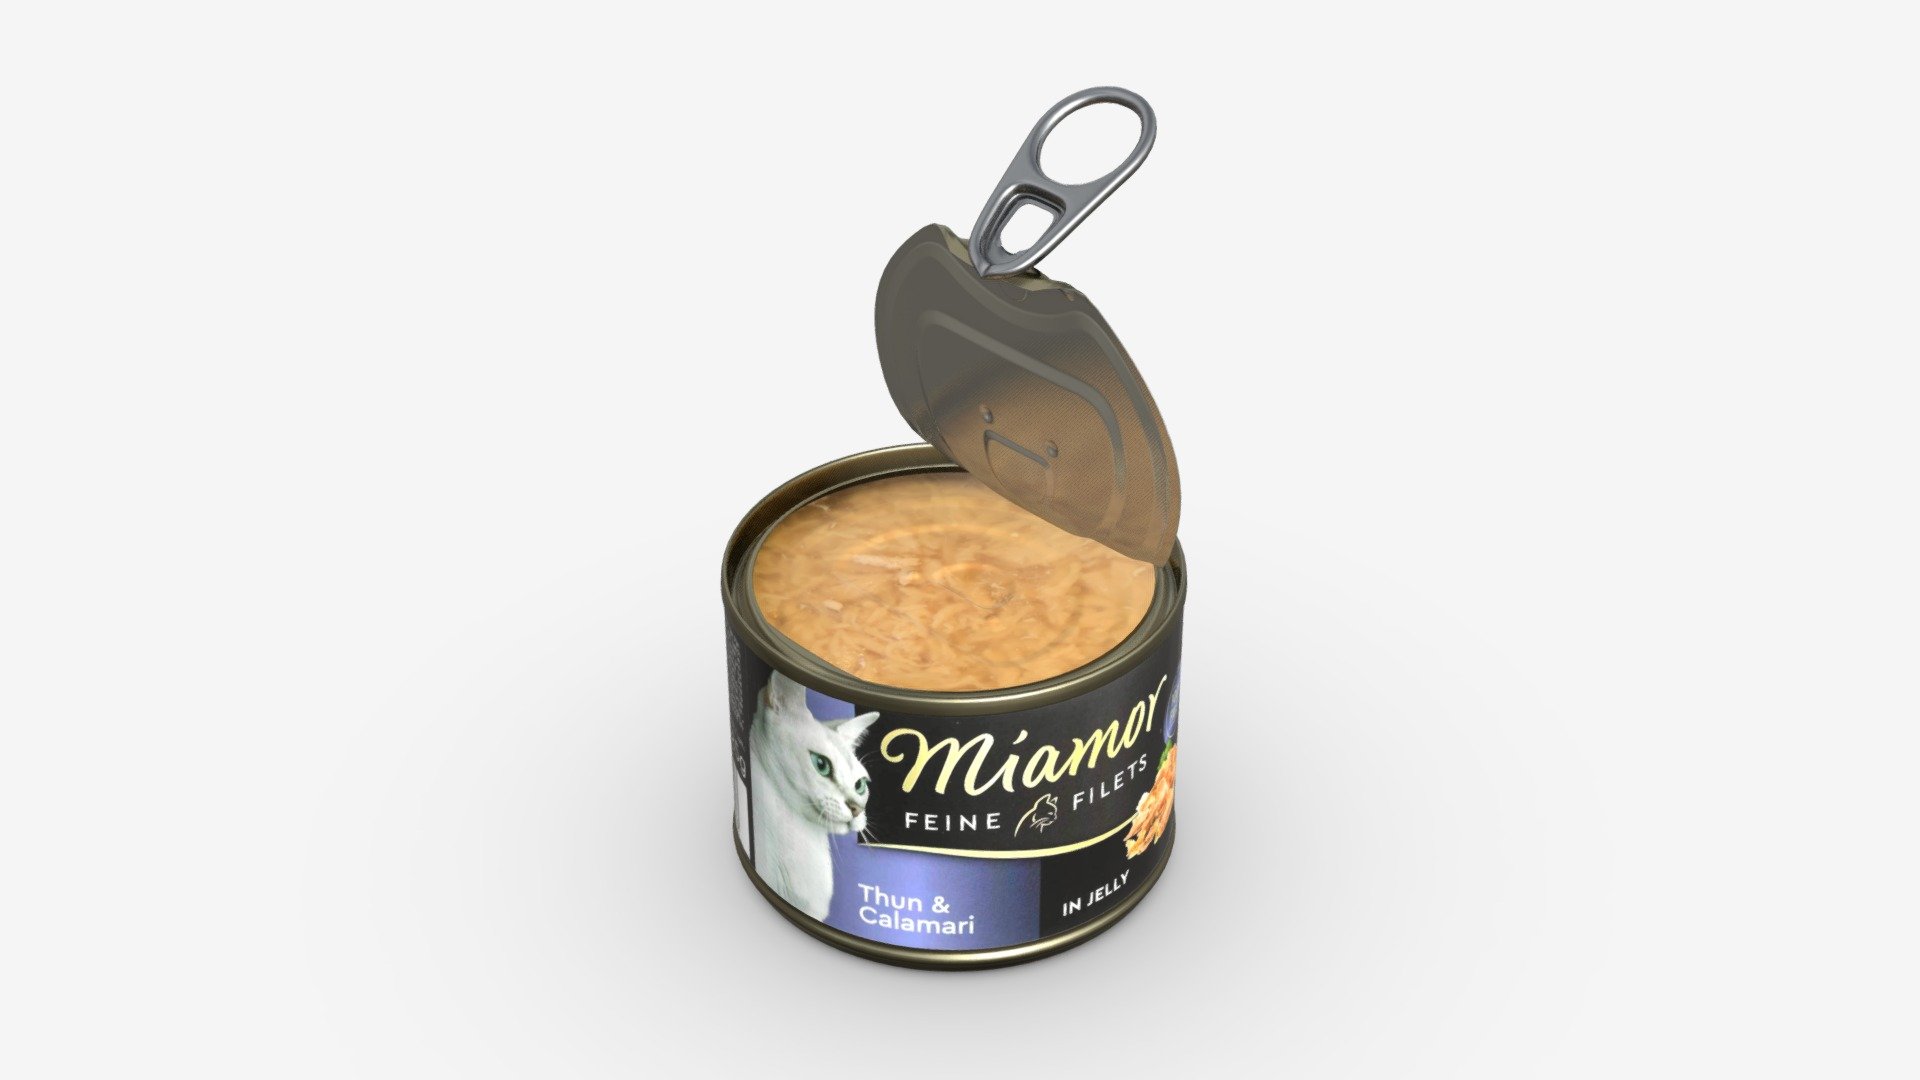 Miamor feine filets in jelly thun cat food open - Buy Royalty Free 3D model by HQ3DMOD (@AivisAstics) 3d model